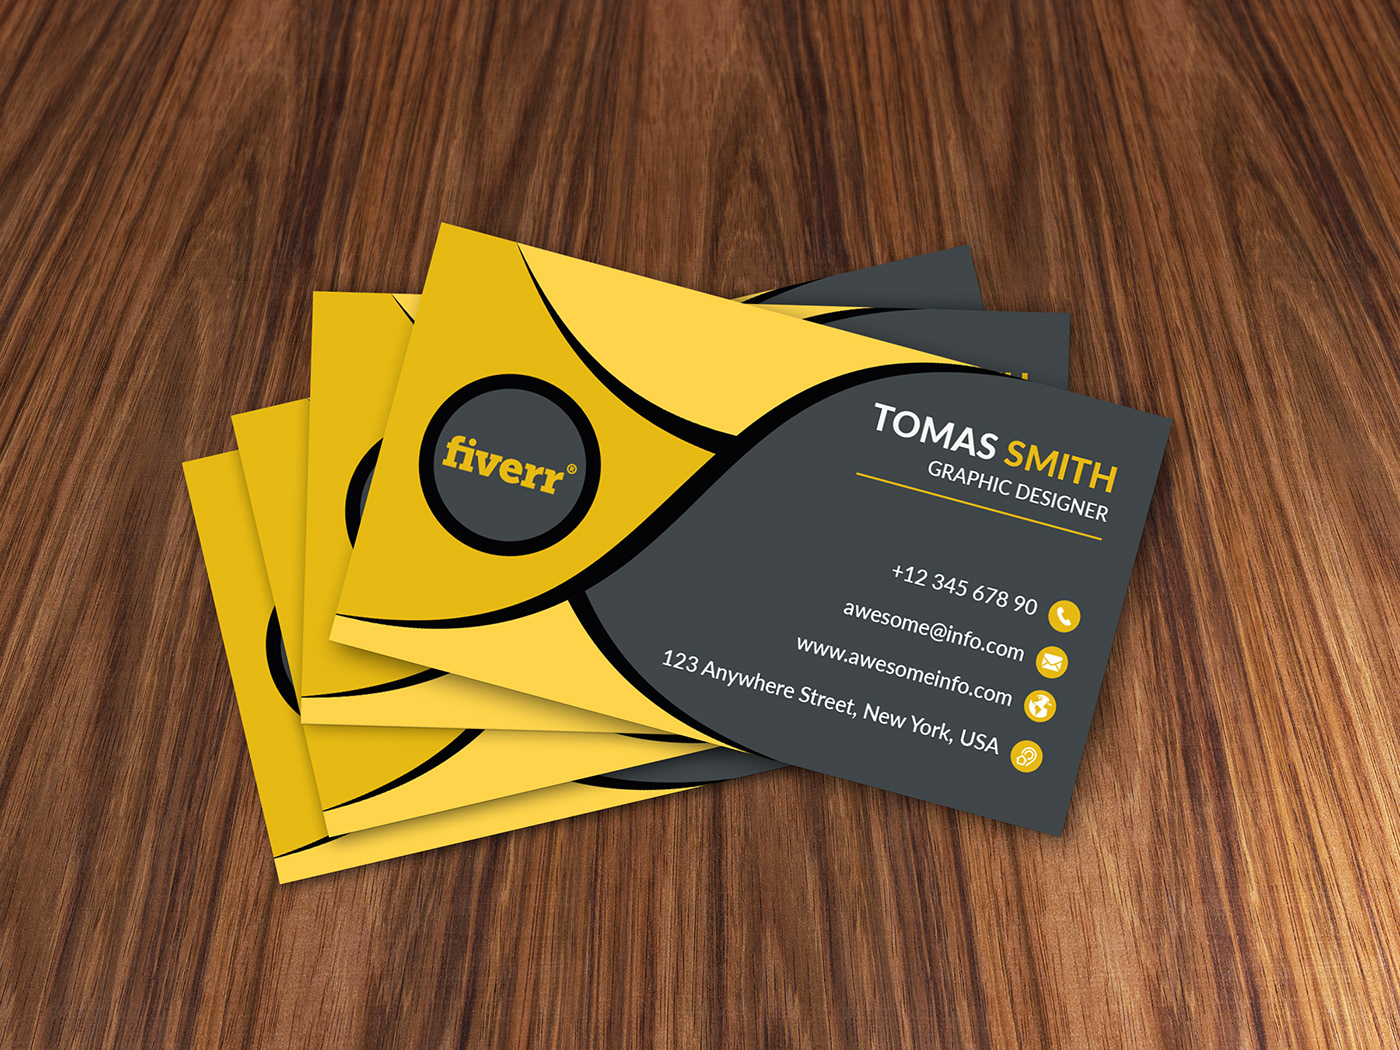 8 Helpful Tips to Create an Effective Business Card